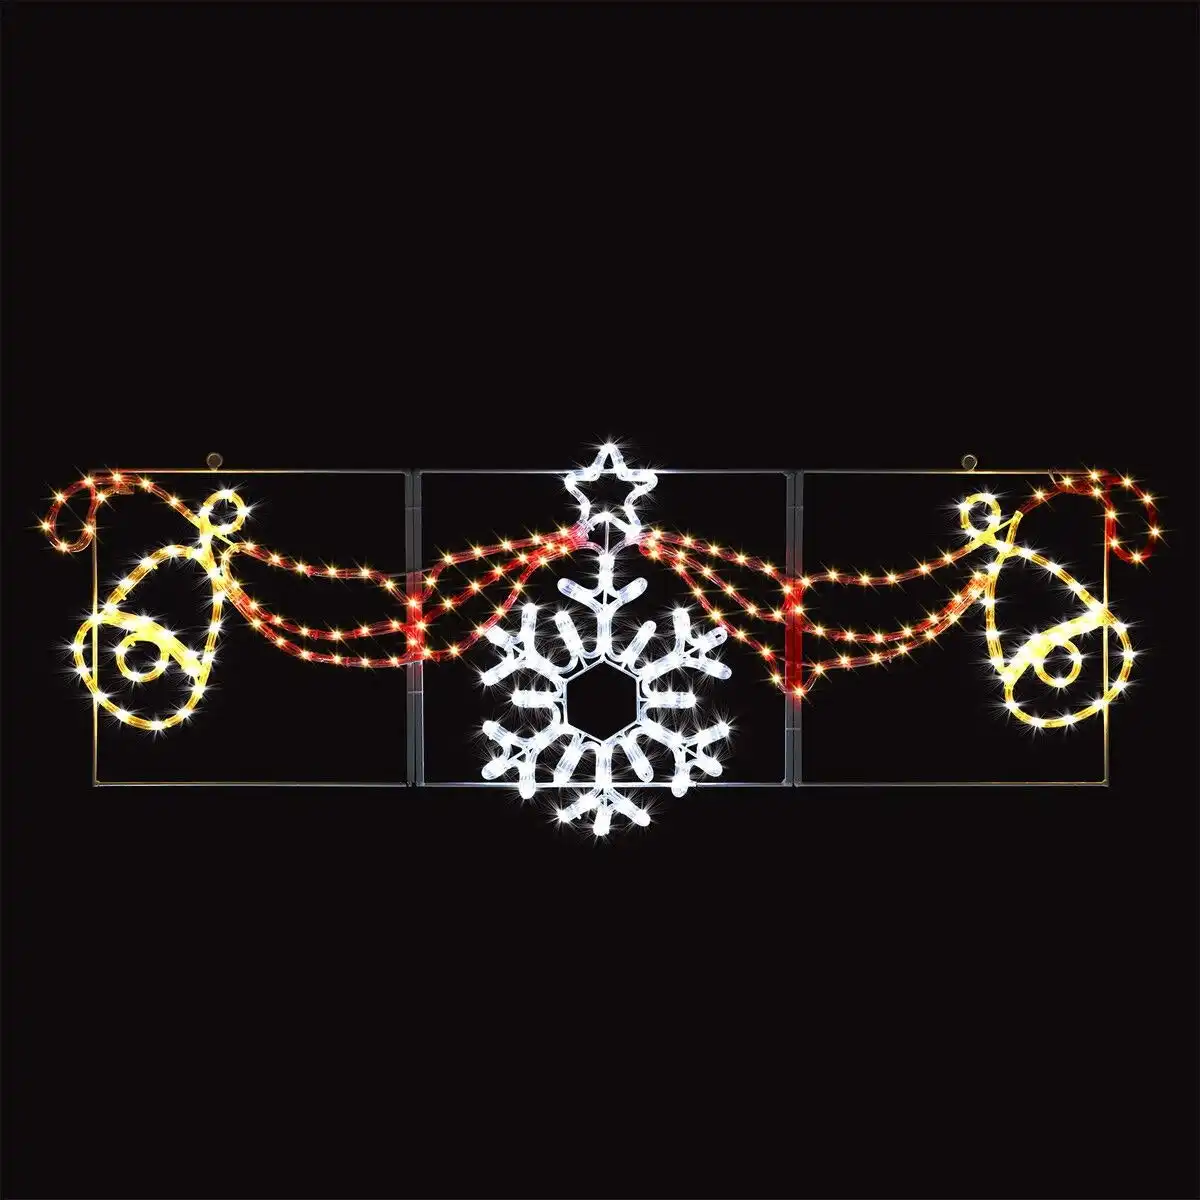 Solight Christmas LED Light Decor Strip Rope Xmas Snowflake Bell Holiday Ornament Outdoor Indoor 145x53cm XL Size